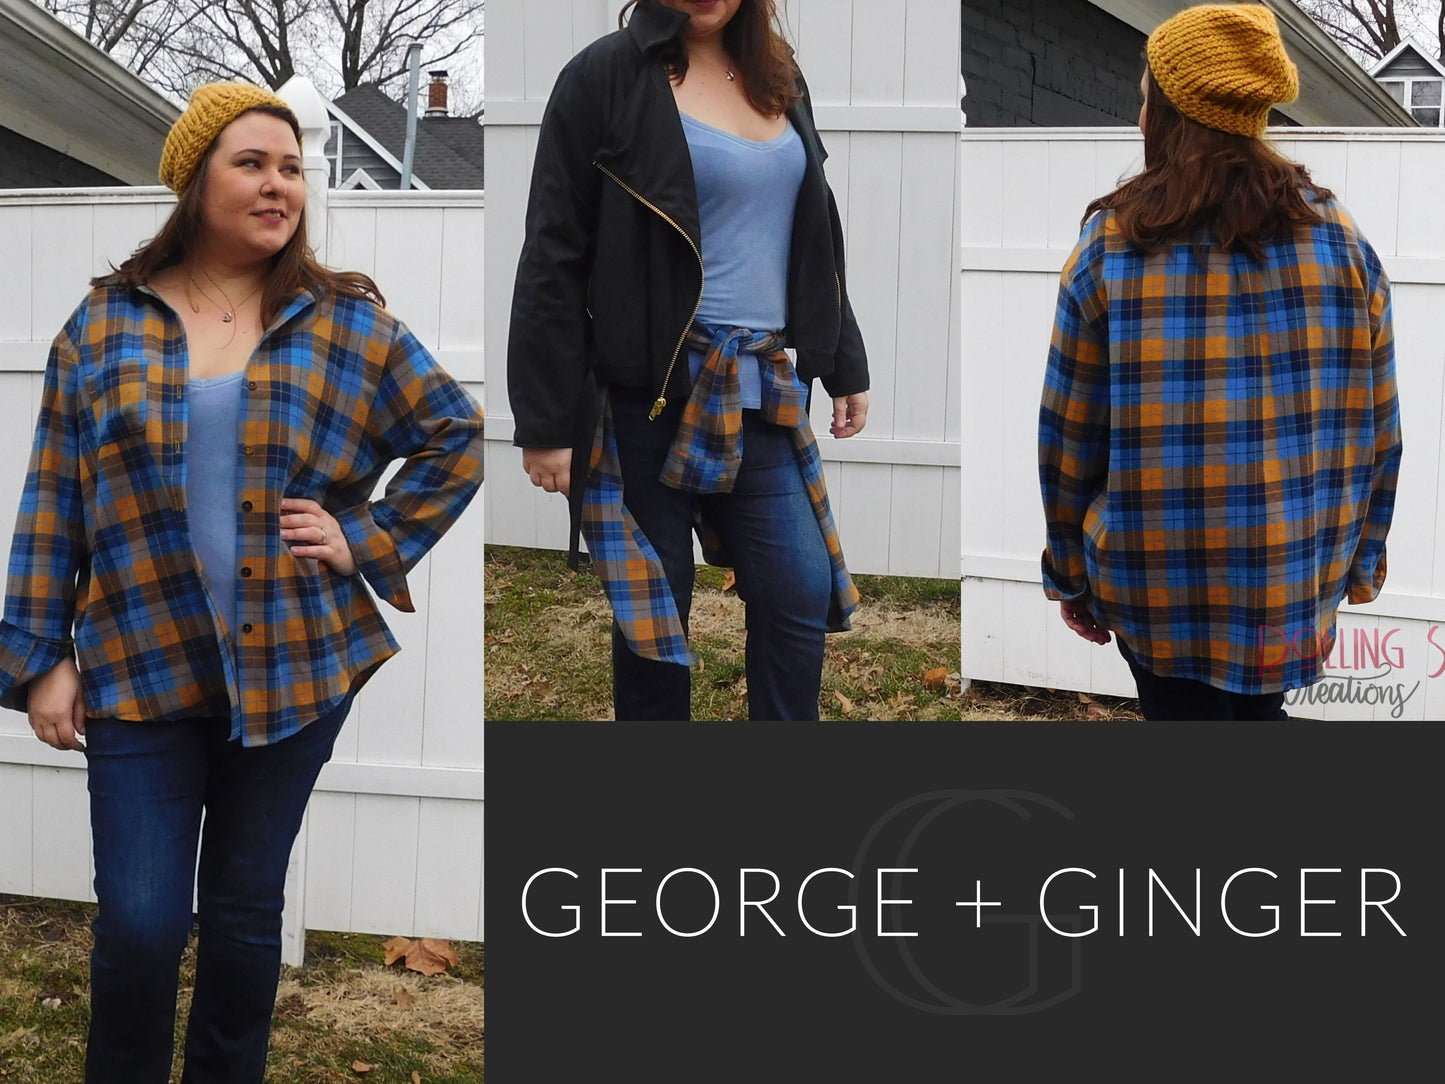 The Paranoid Flannel Shirt PDF Sewing Pattern